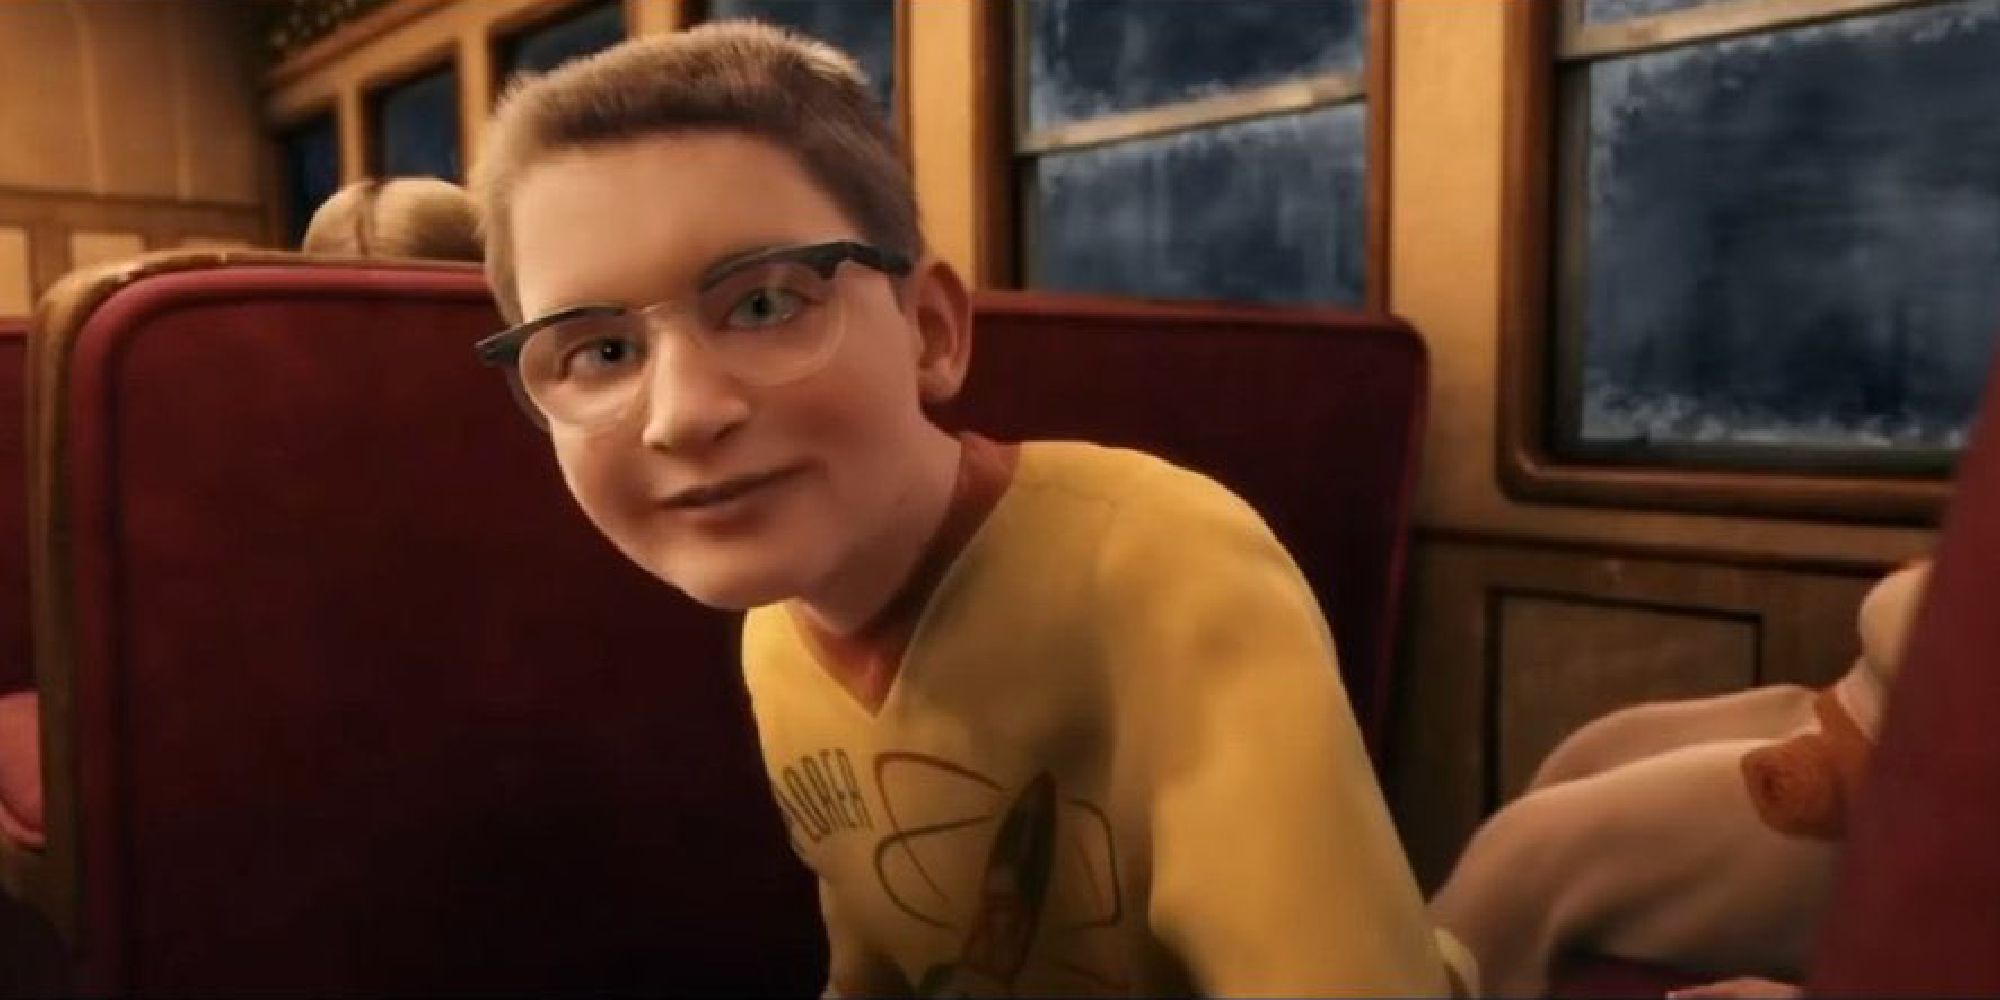 A boy on the train in The Polar Express